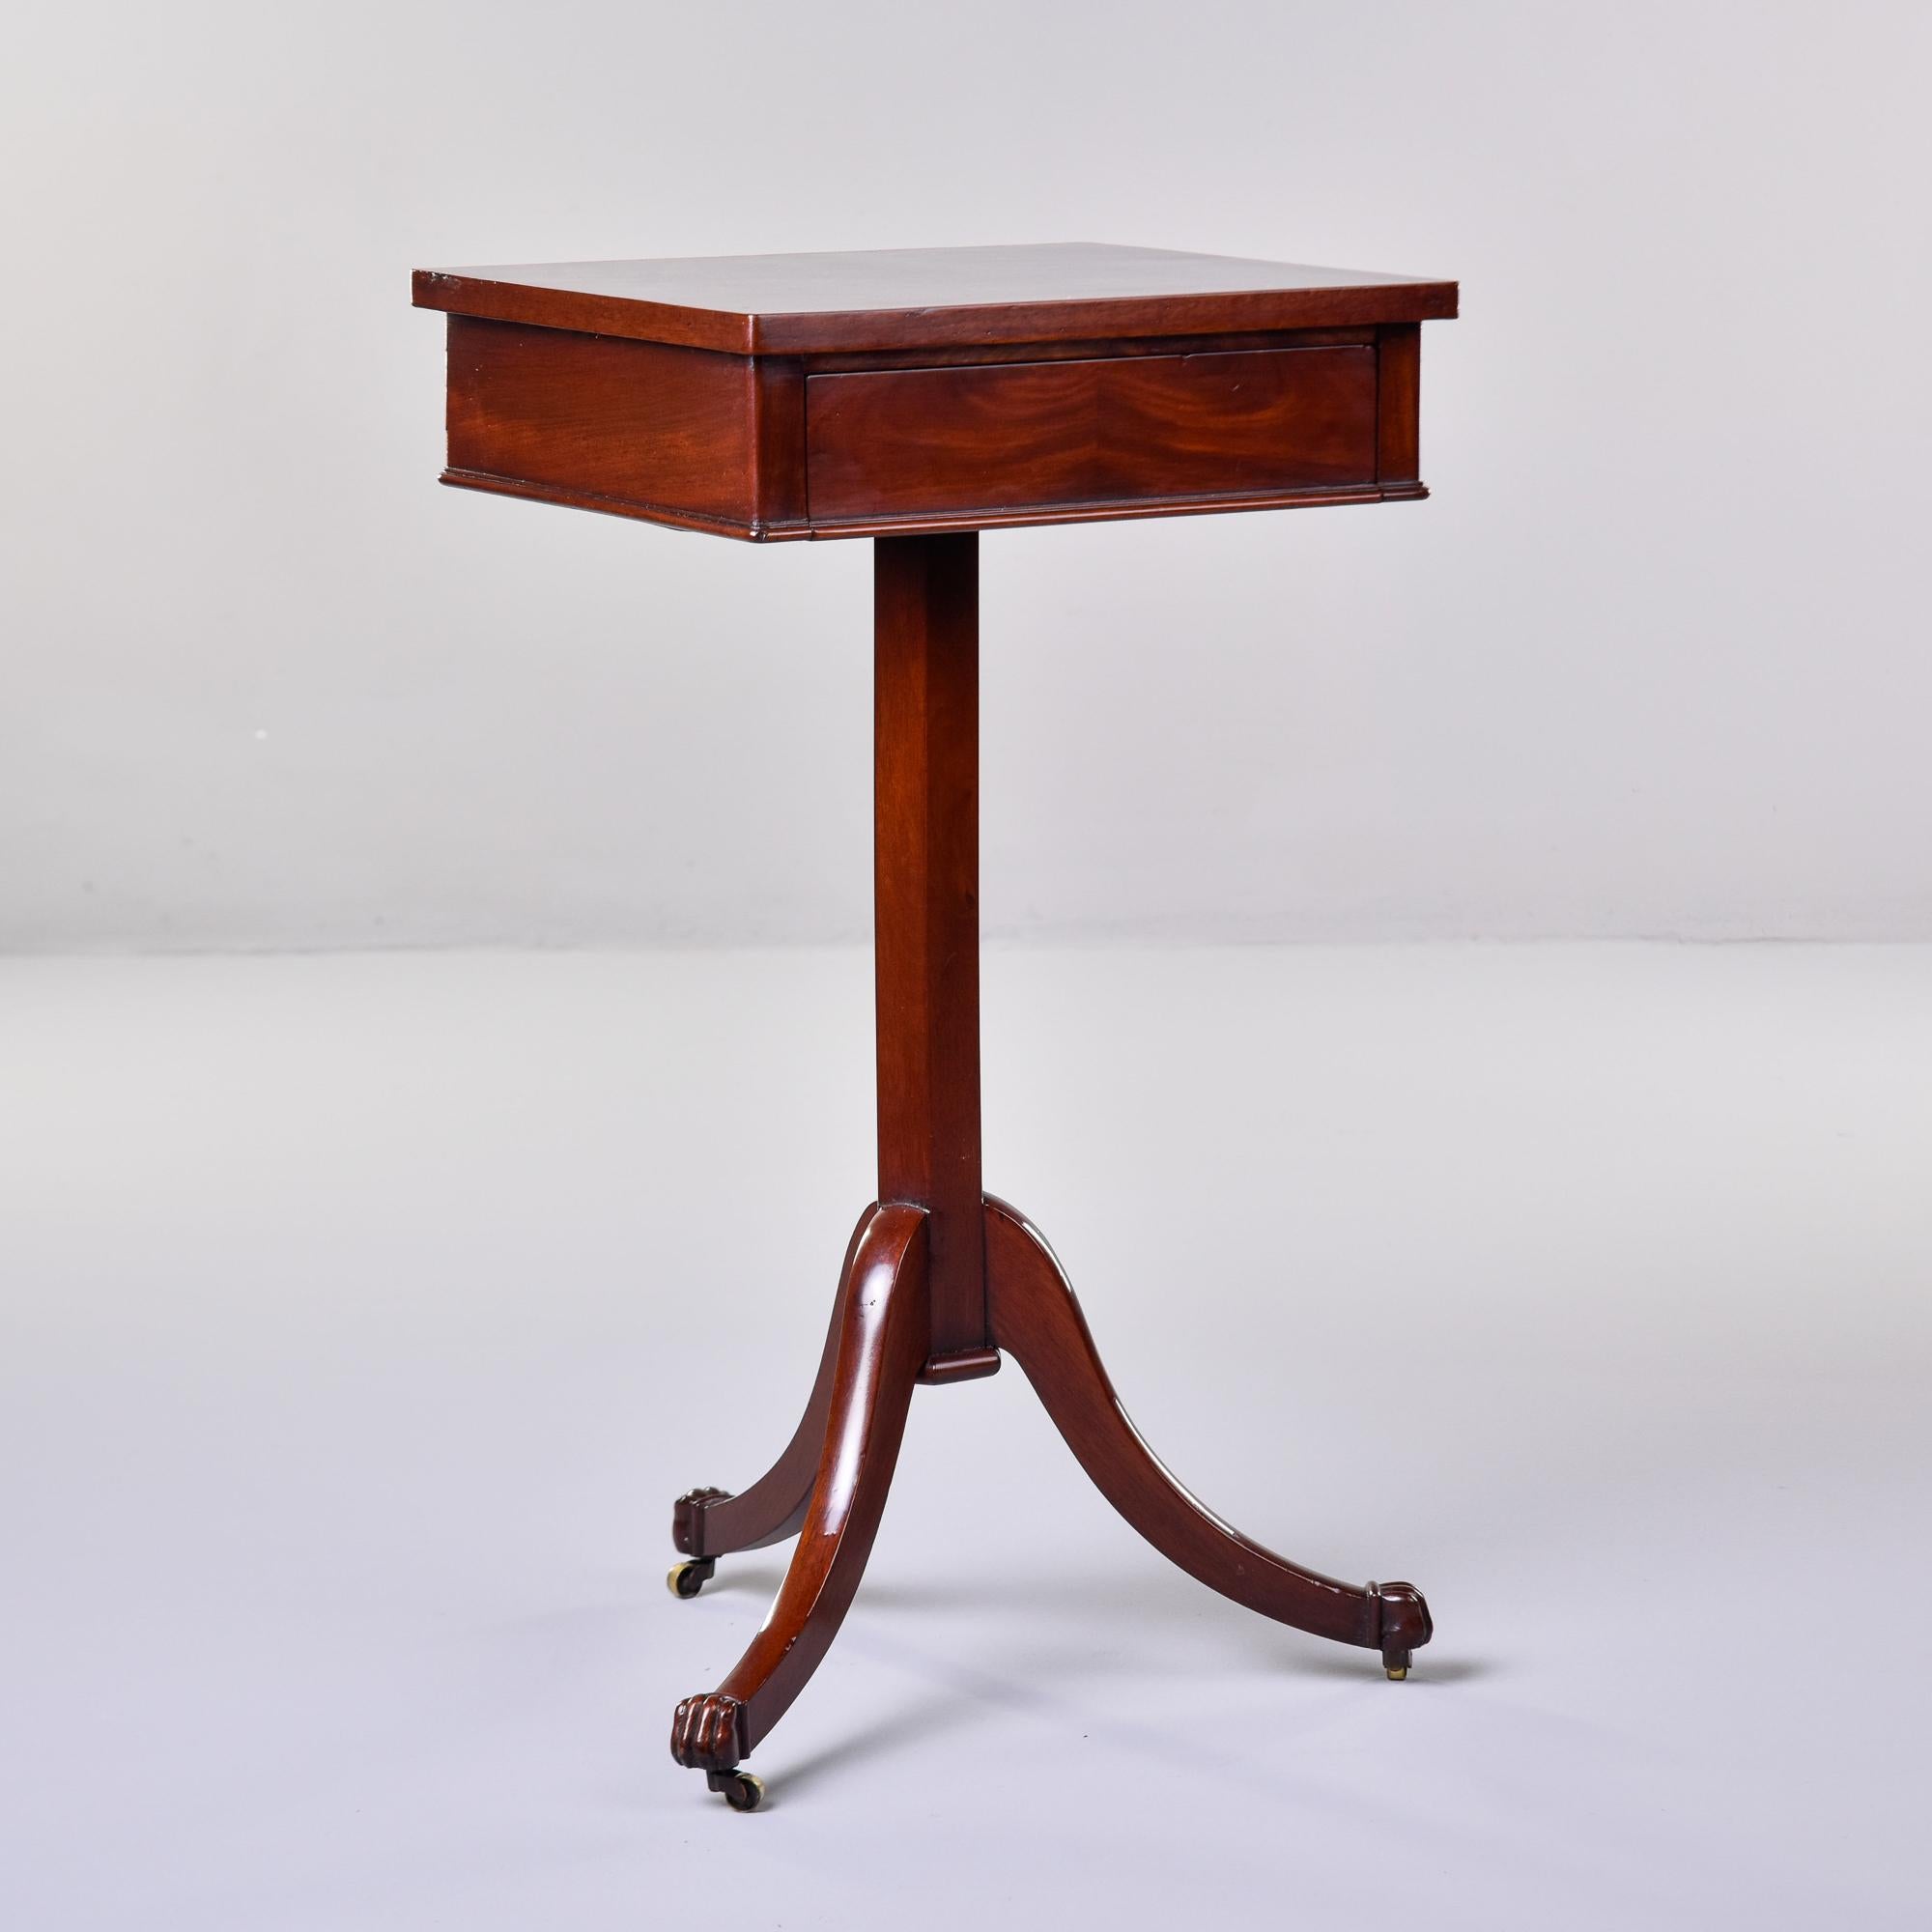 Found in England, this mahogany side table dates from about 1920. Tripod base has curved legs with original brass casters and paw feet. Six-sided center support with a table top an inch shy of being an actual square and one functional drawer. Nicely